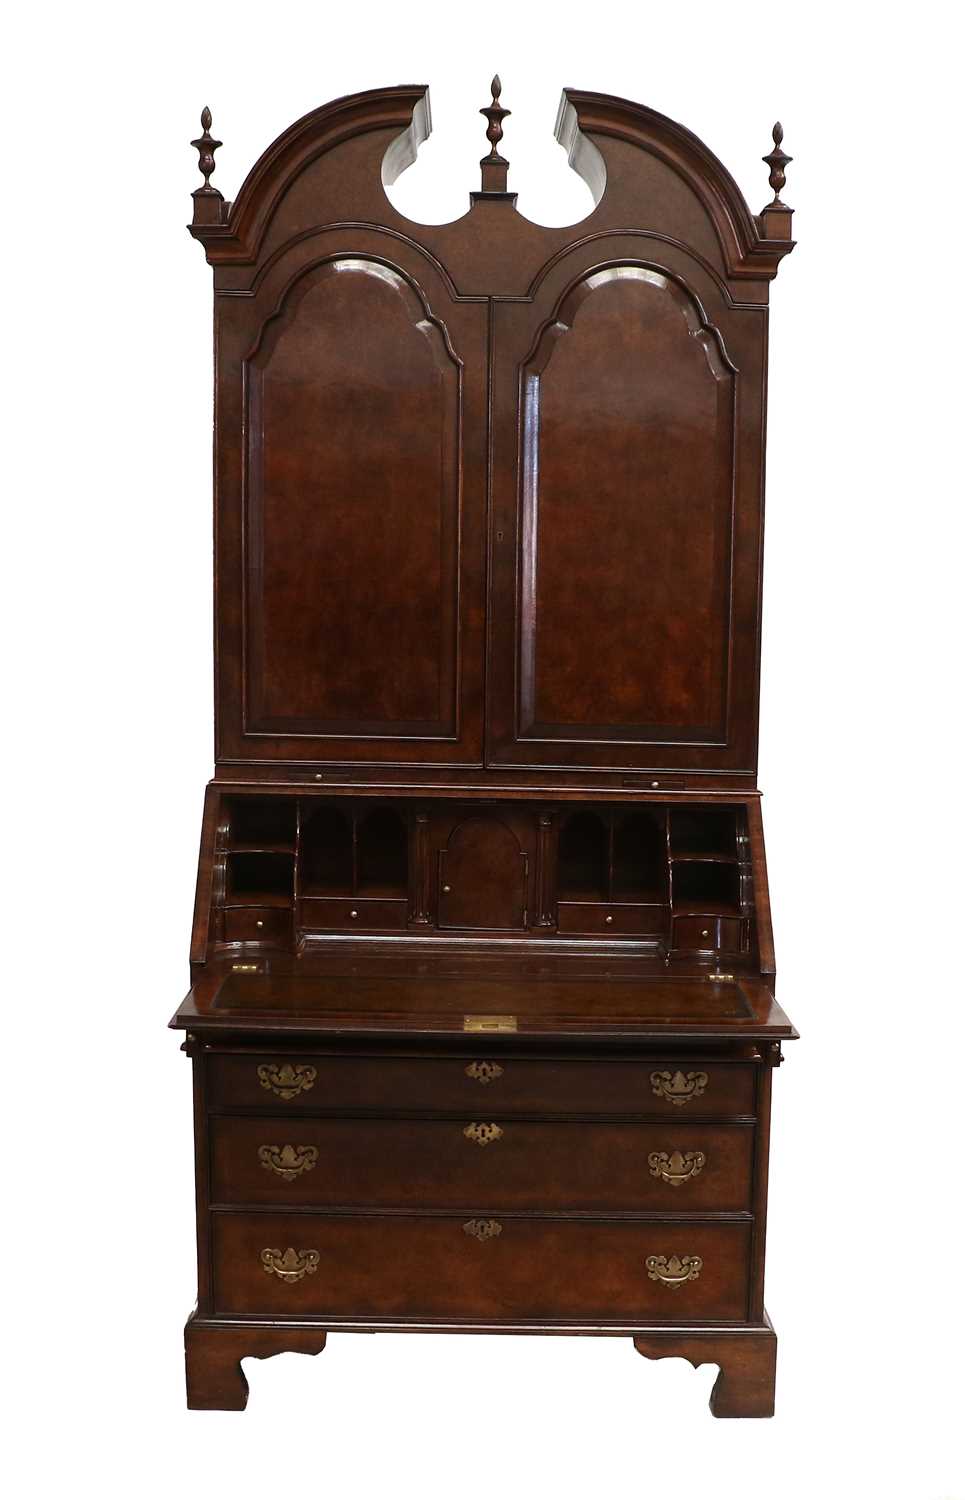 A Queen Anne-Style Burr Walnut, Crossbanded and Featherbanded Bureau Bookcase, modern, the scroll